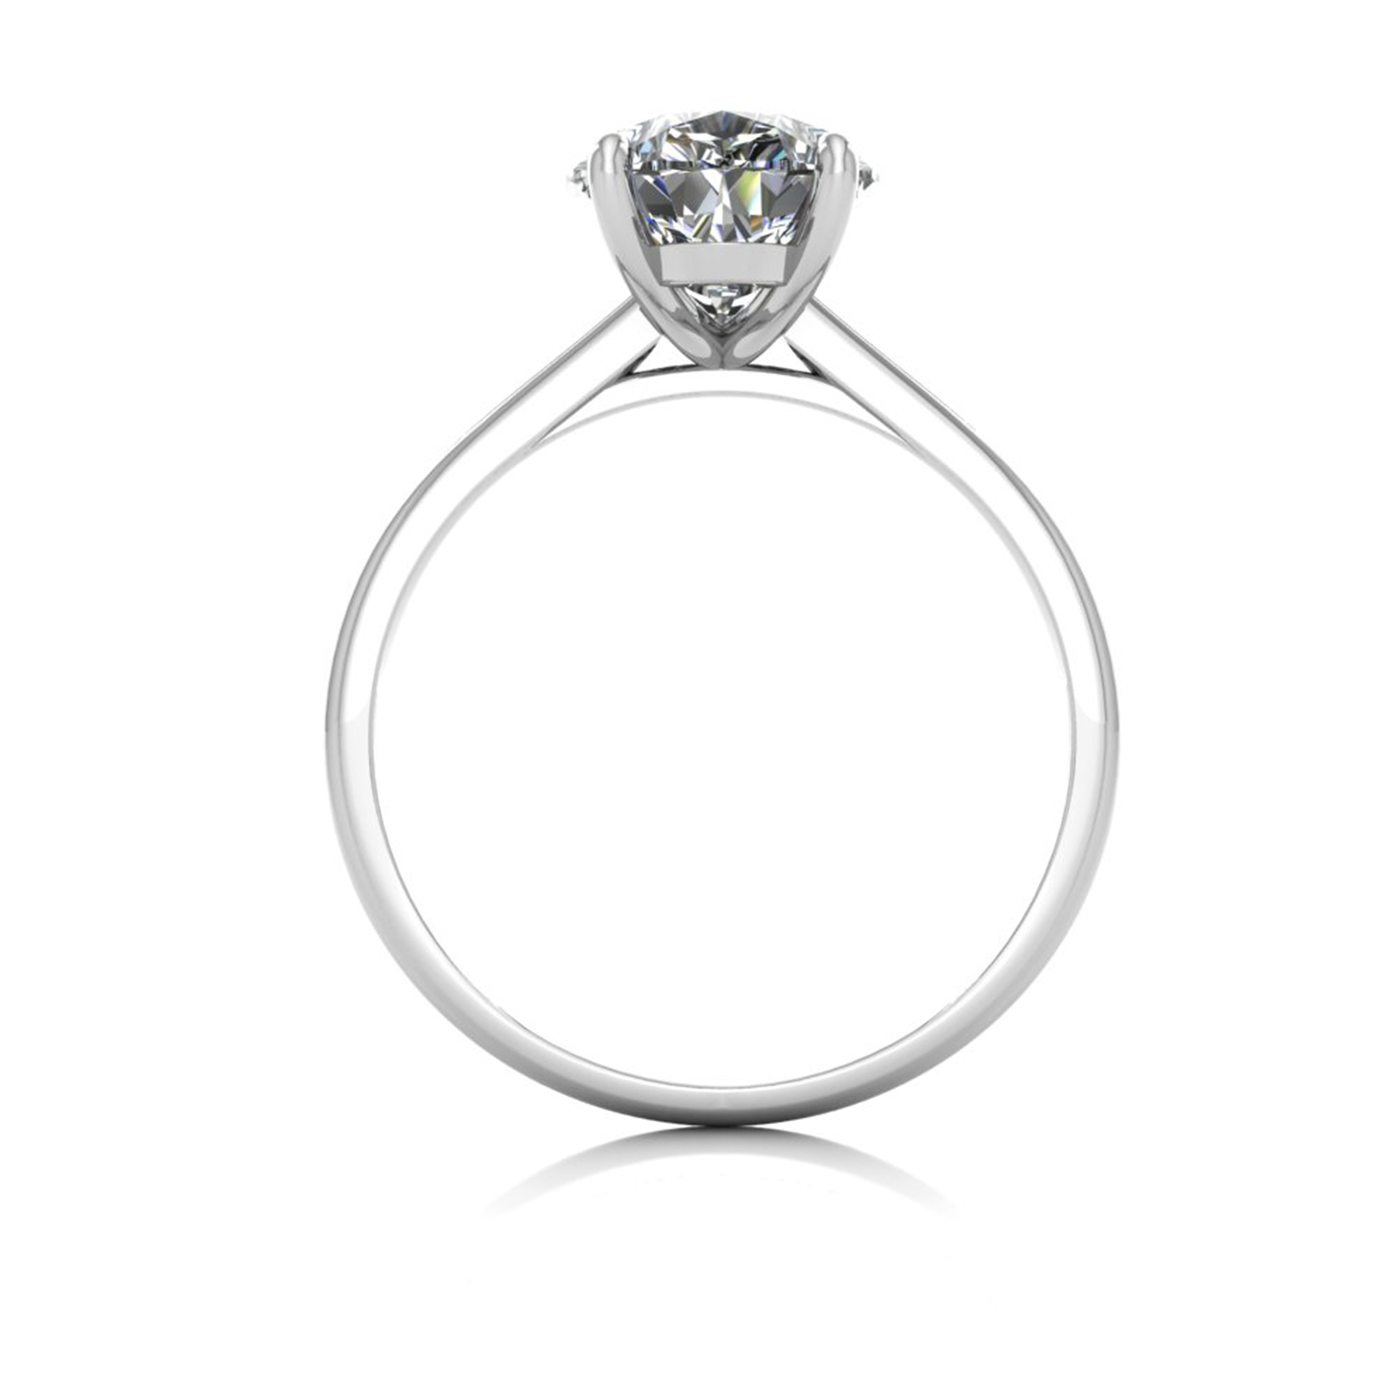 18k white gold  2,50 ct 3 prongs solitaire pear cut diamond engagement ring with whisper thin band